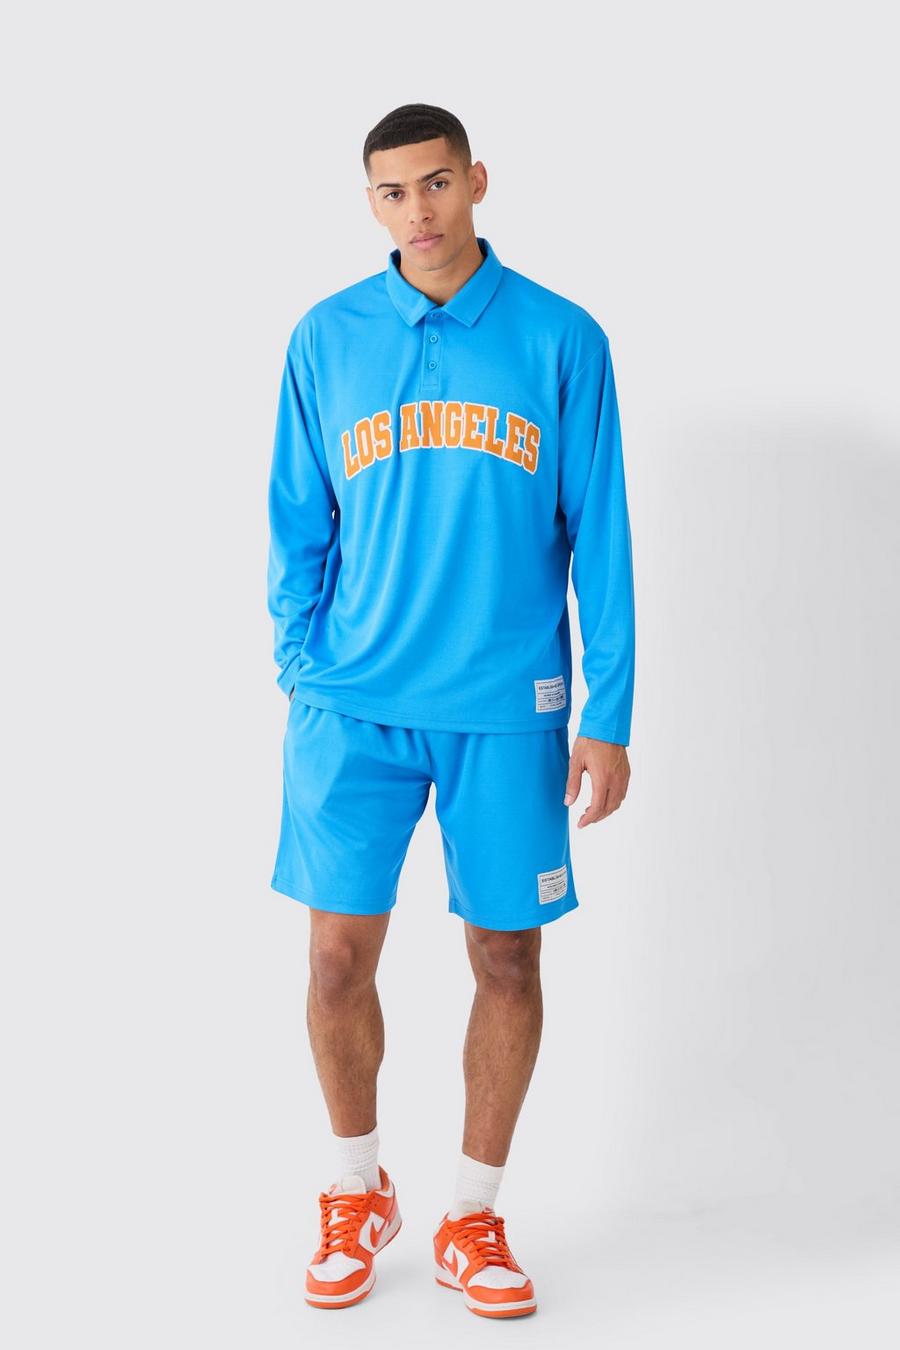 Oversize Los Angeles Rugby Mesh-Poloshirt & Mesh-Shorts, Blue